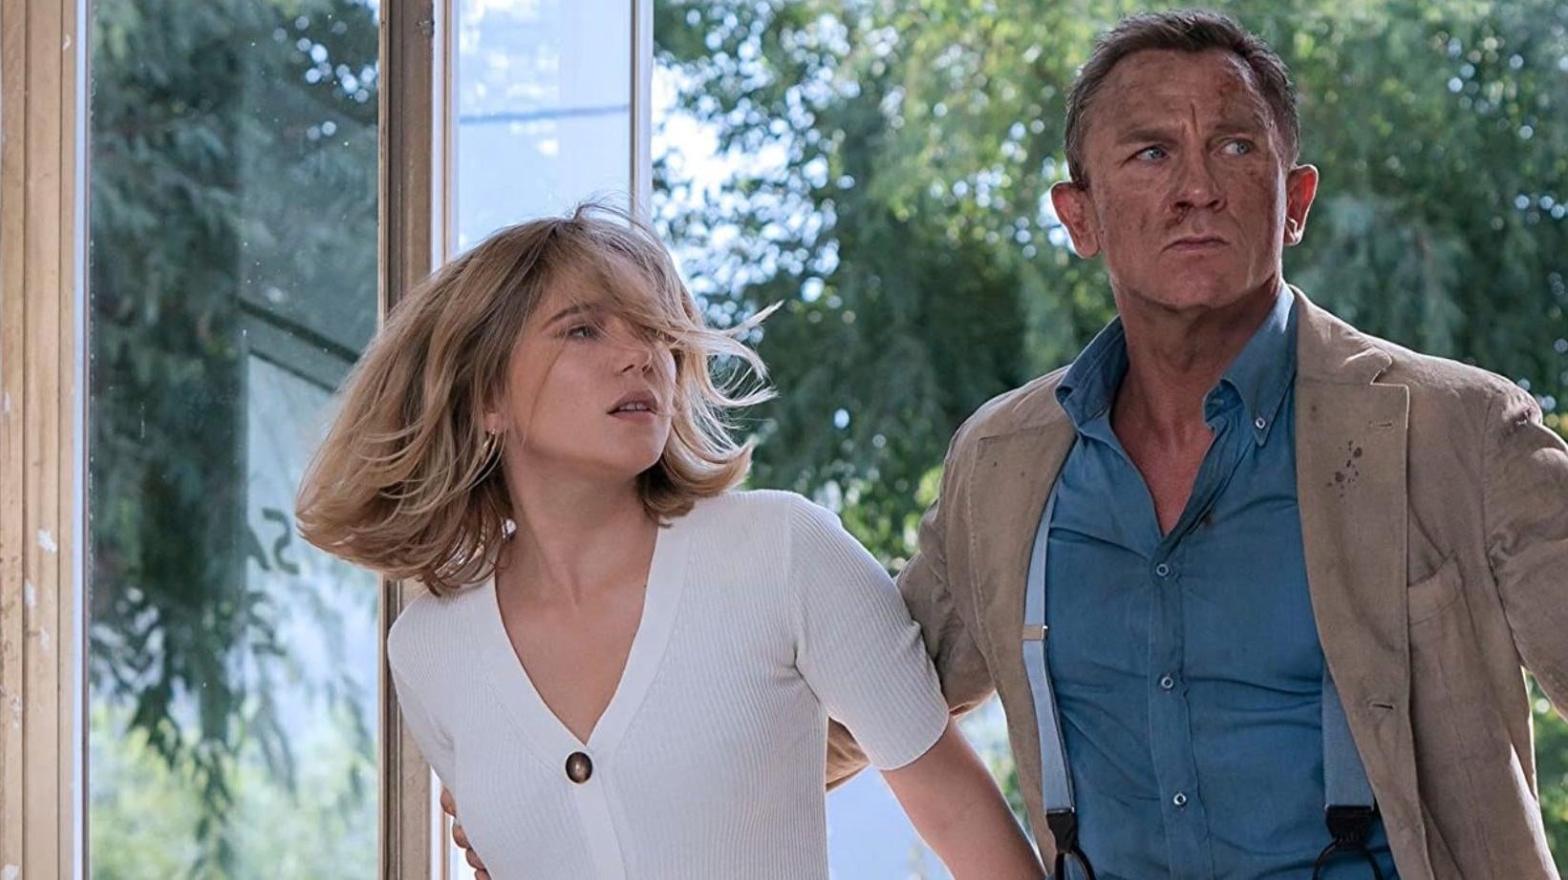 Léa Seydoux and Daniel Craig in No Time to Die. (Photo: MGM)